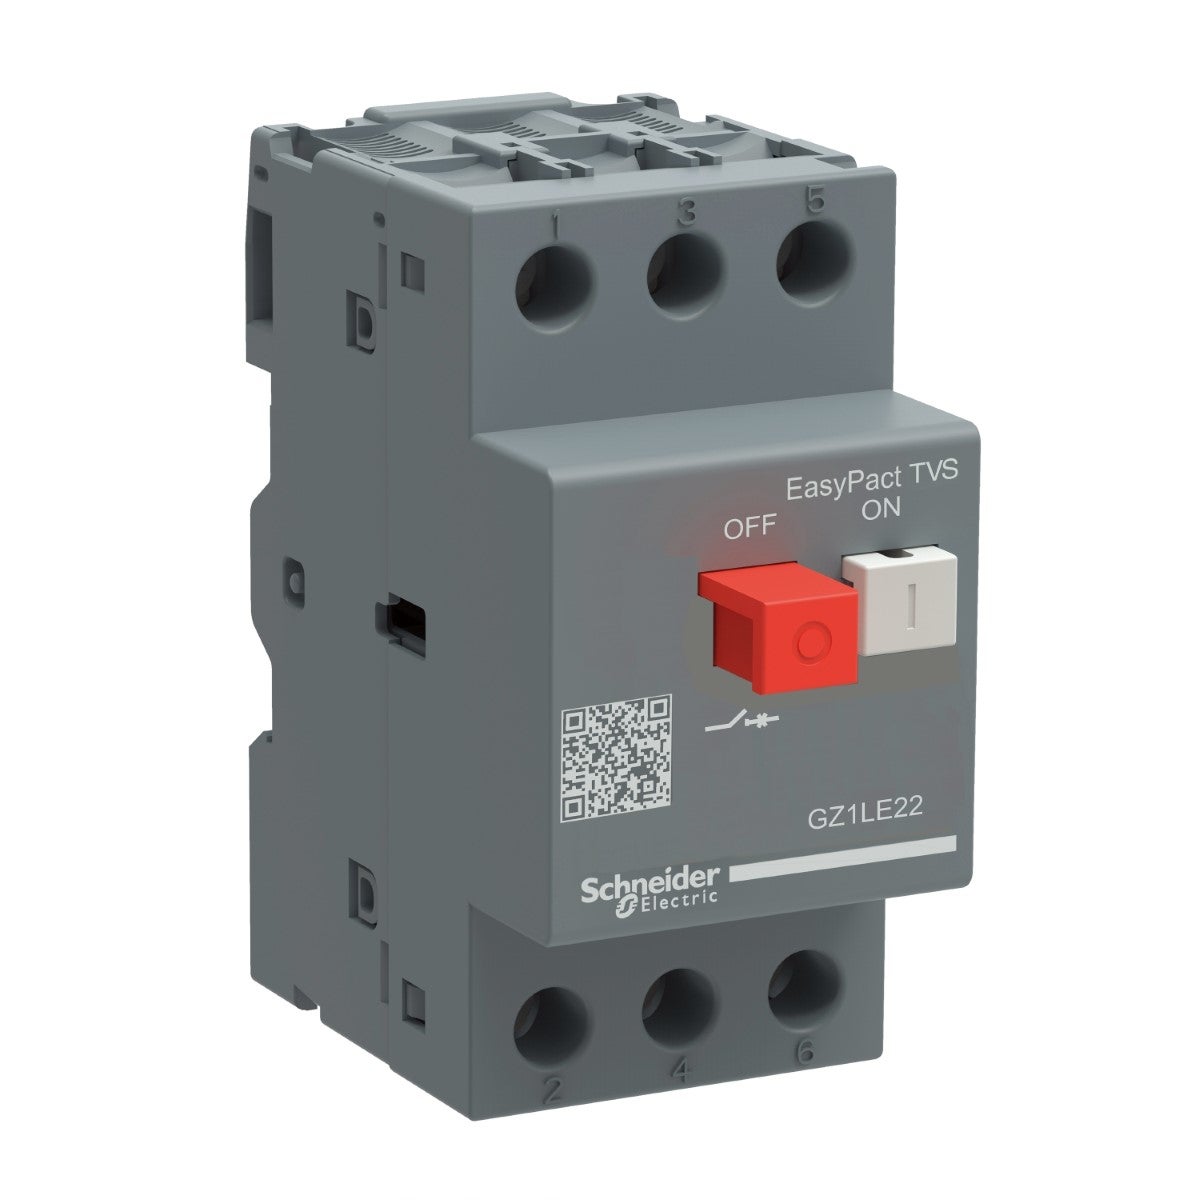 Motor circuit breaker,EasyPact GZ1,3P,2.5A,magnetic detection